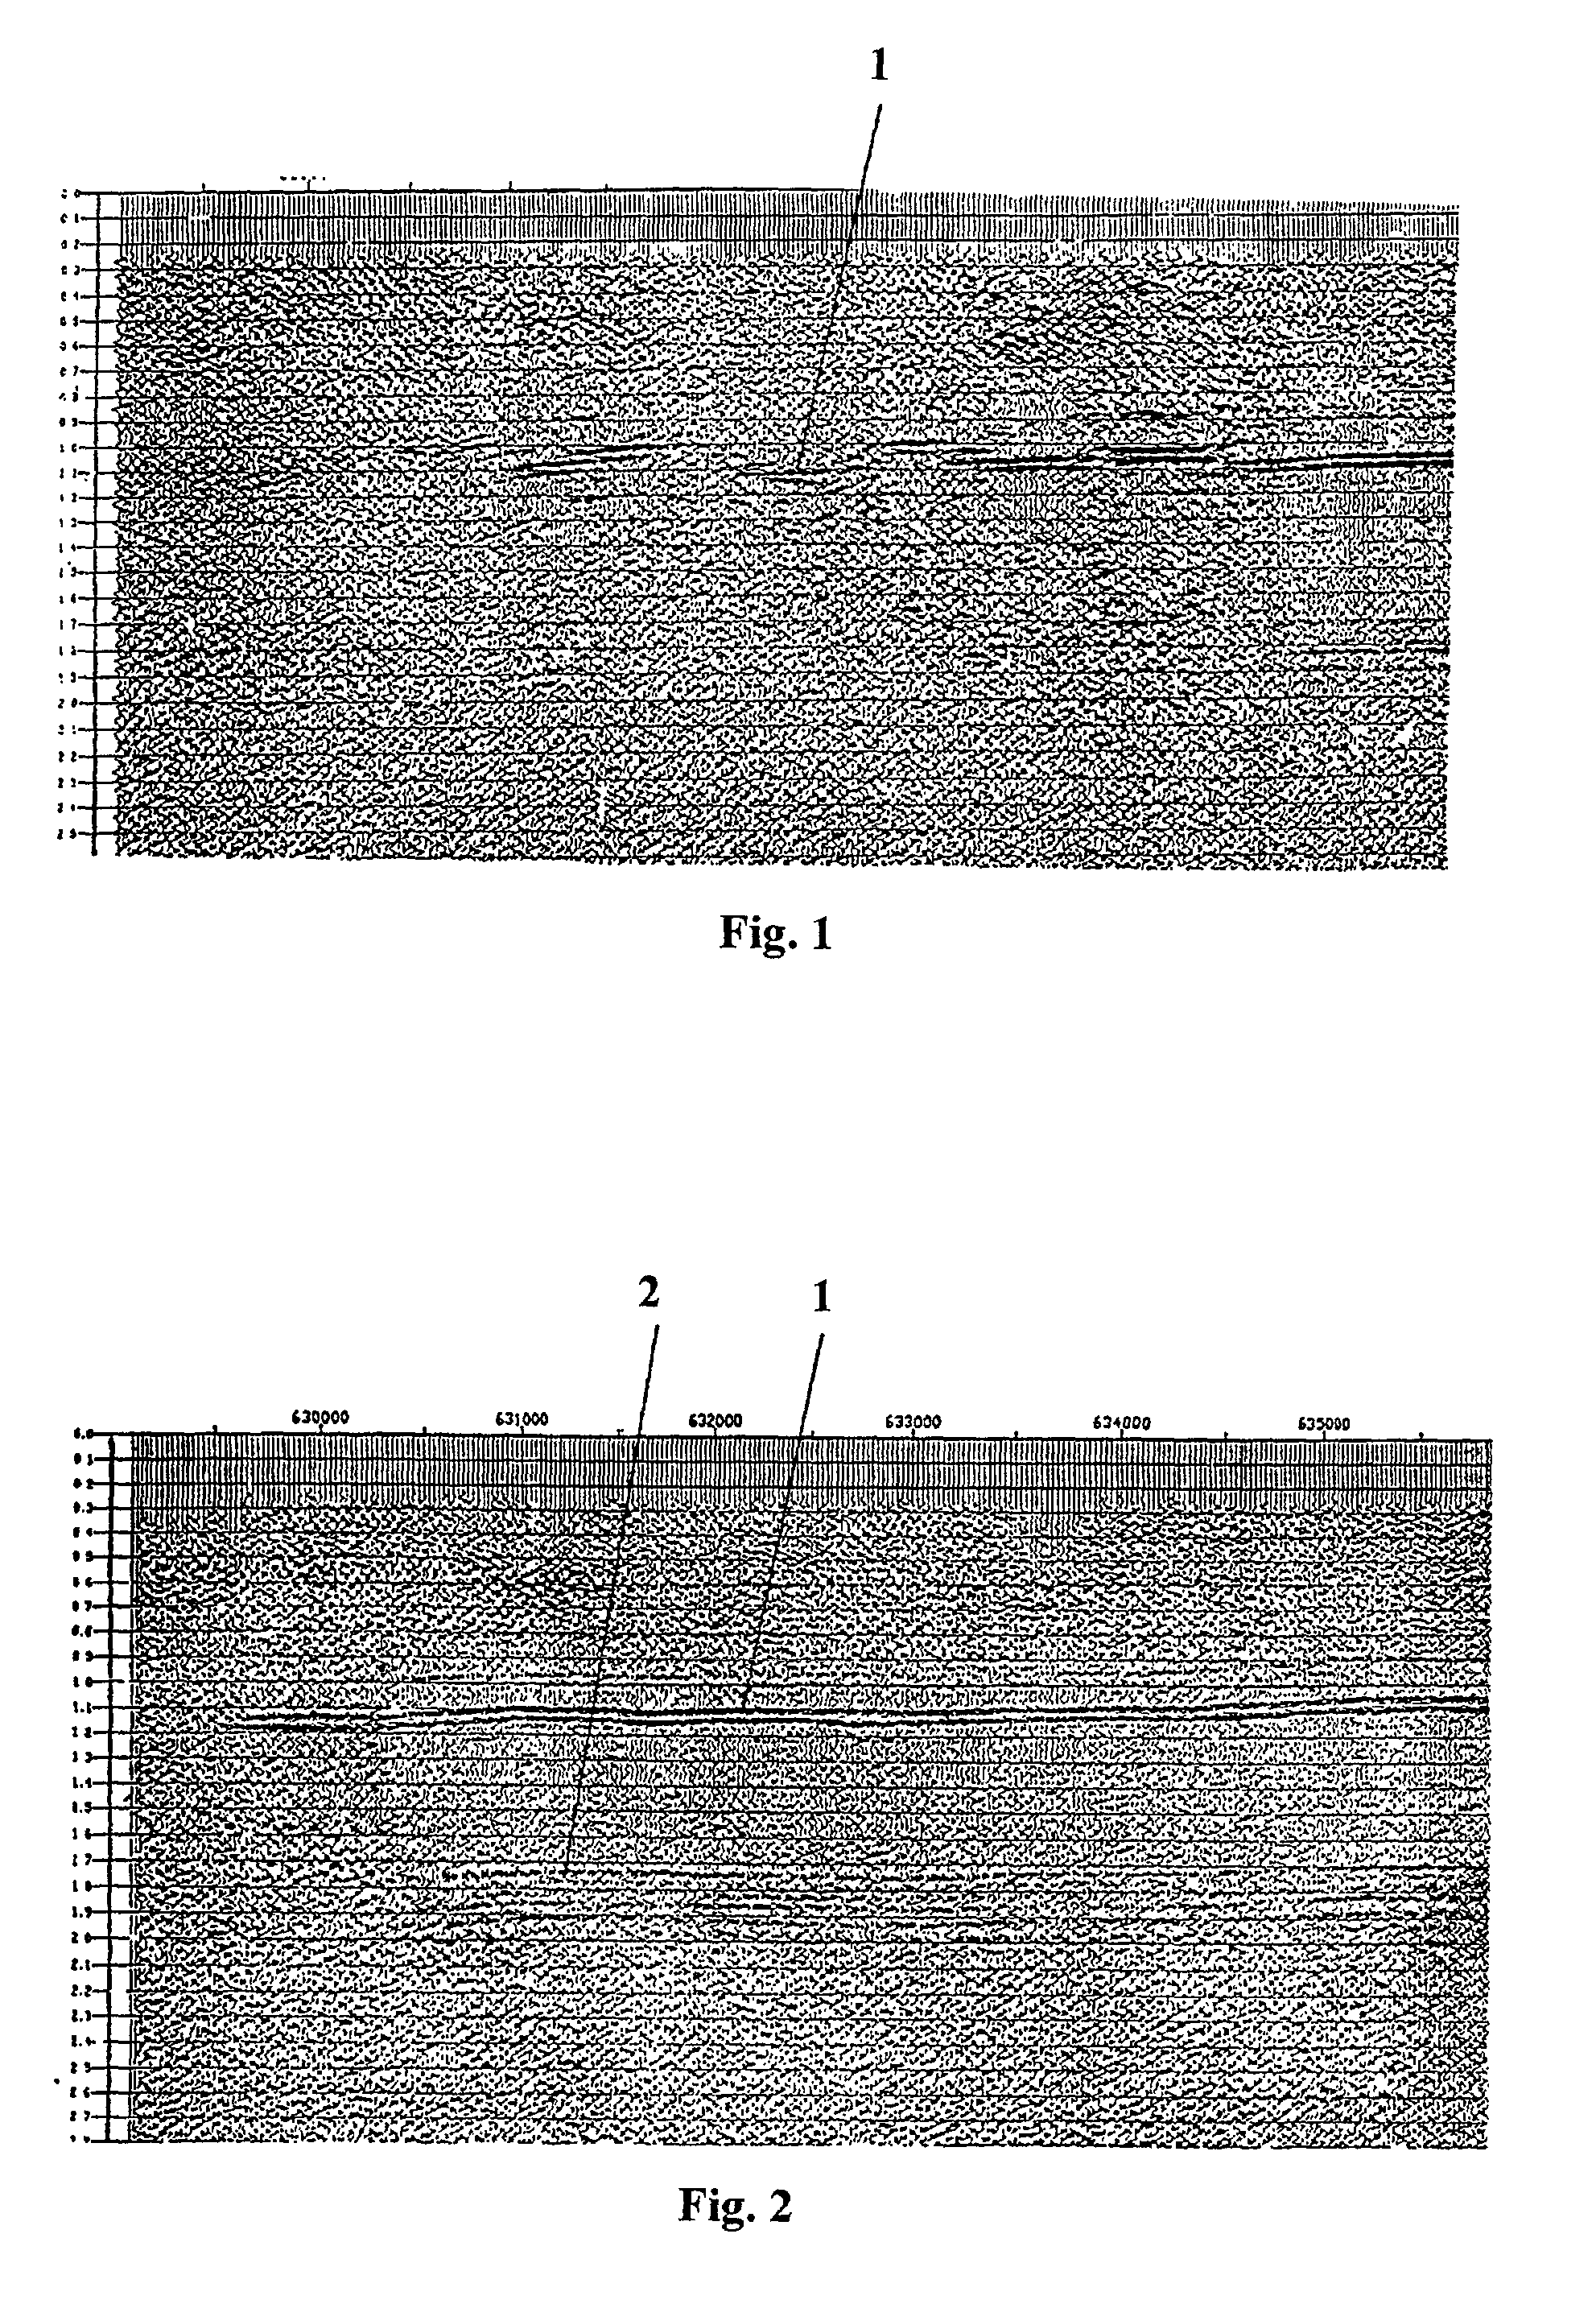 Static correction method for exploration seismic data using first arrivals of seismic waves